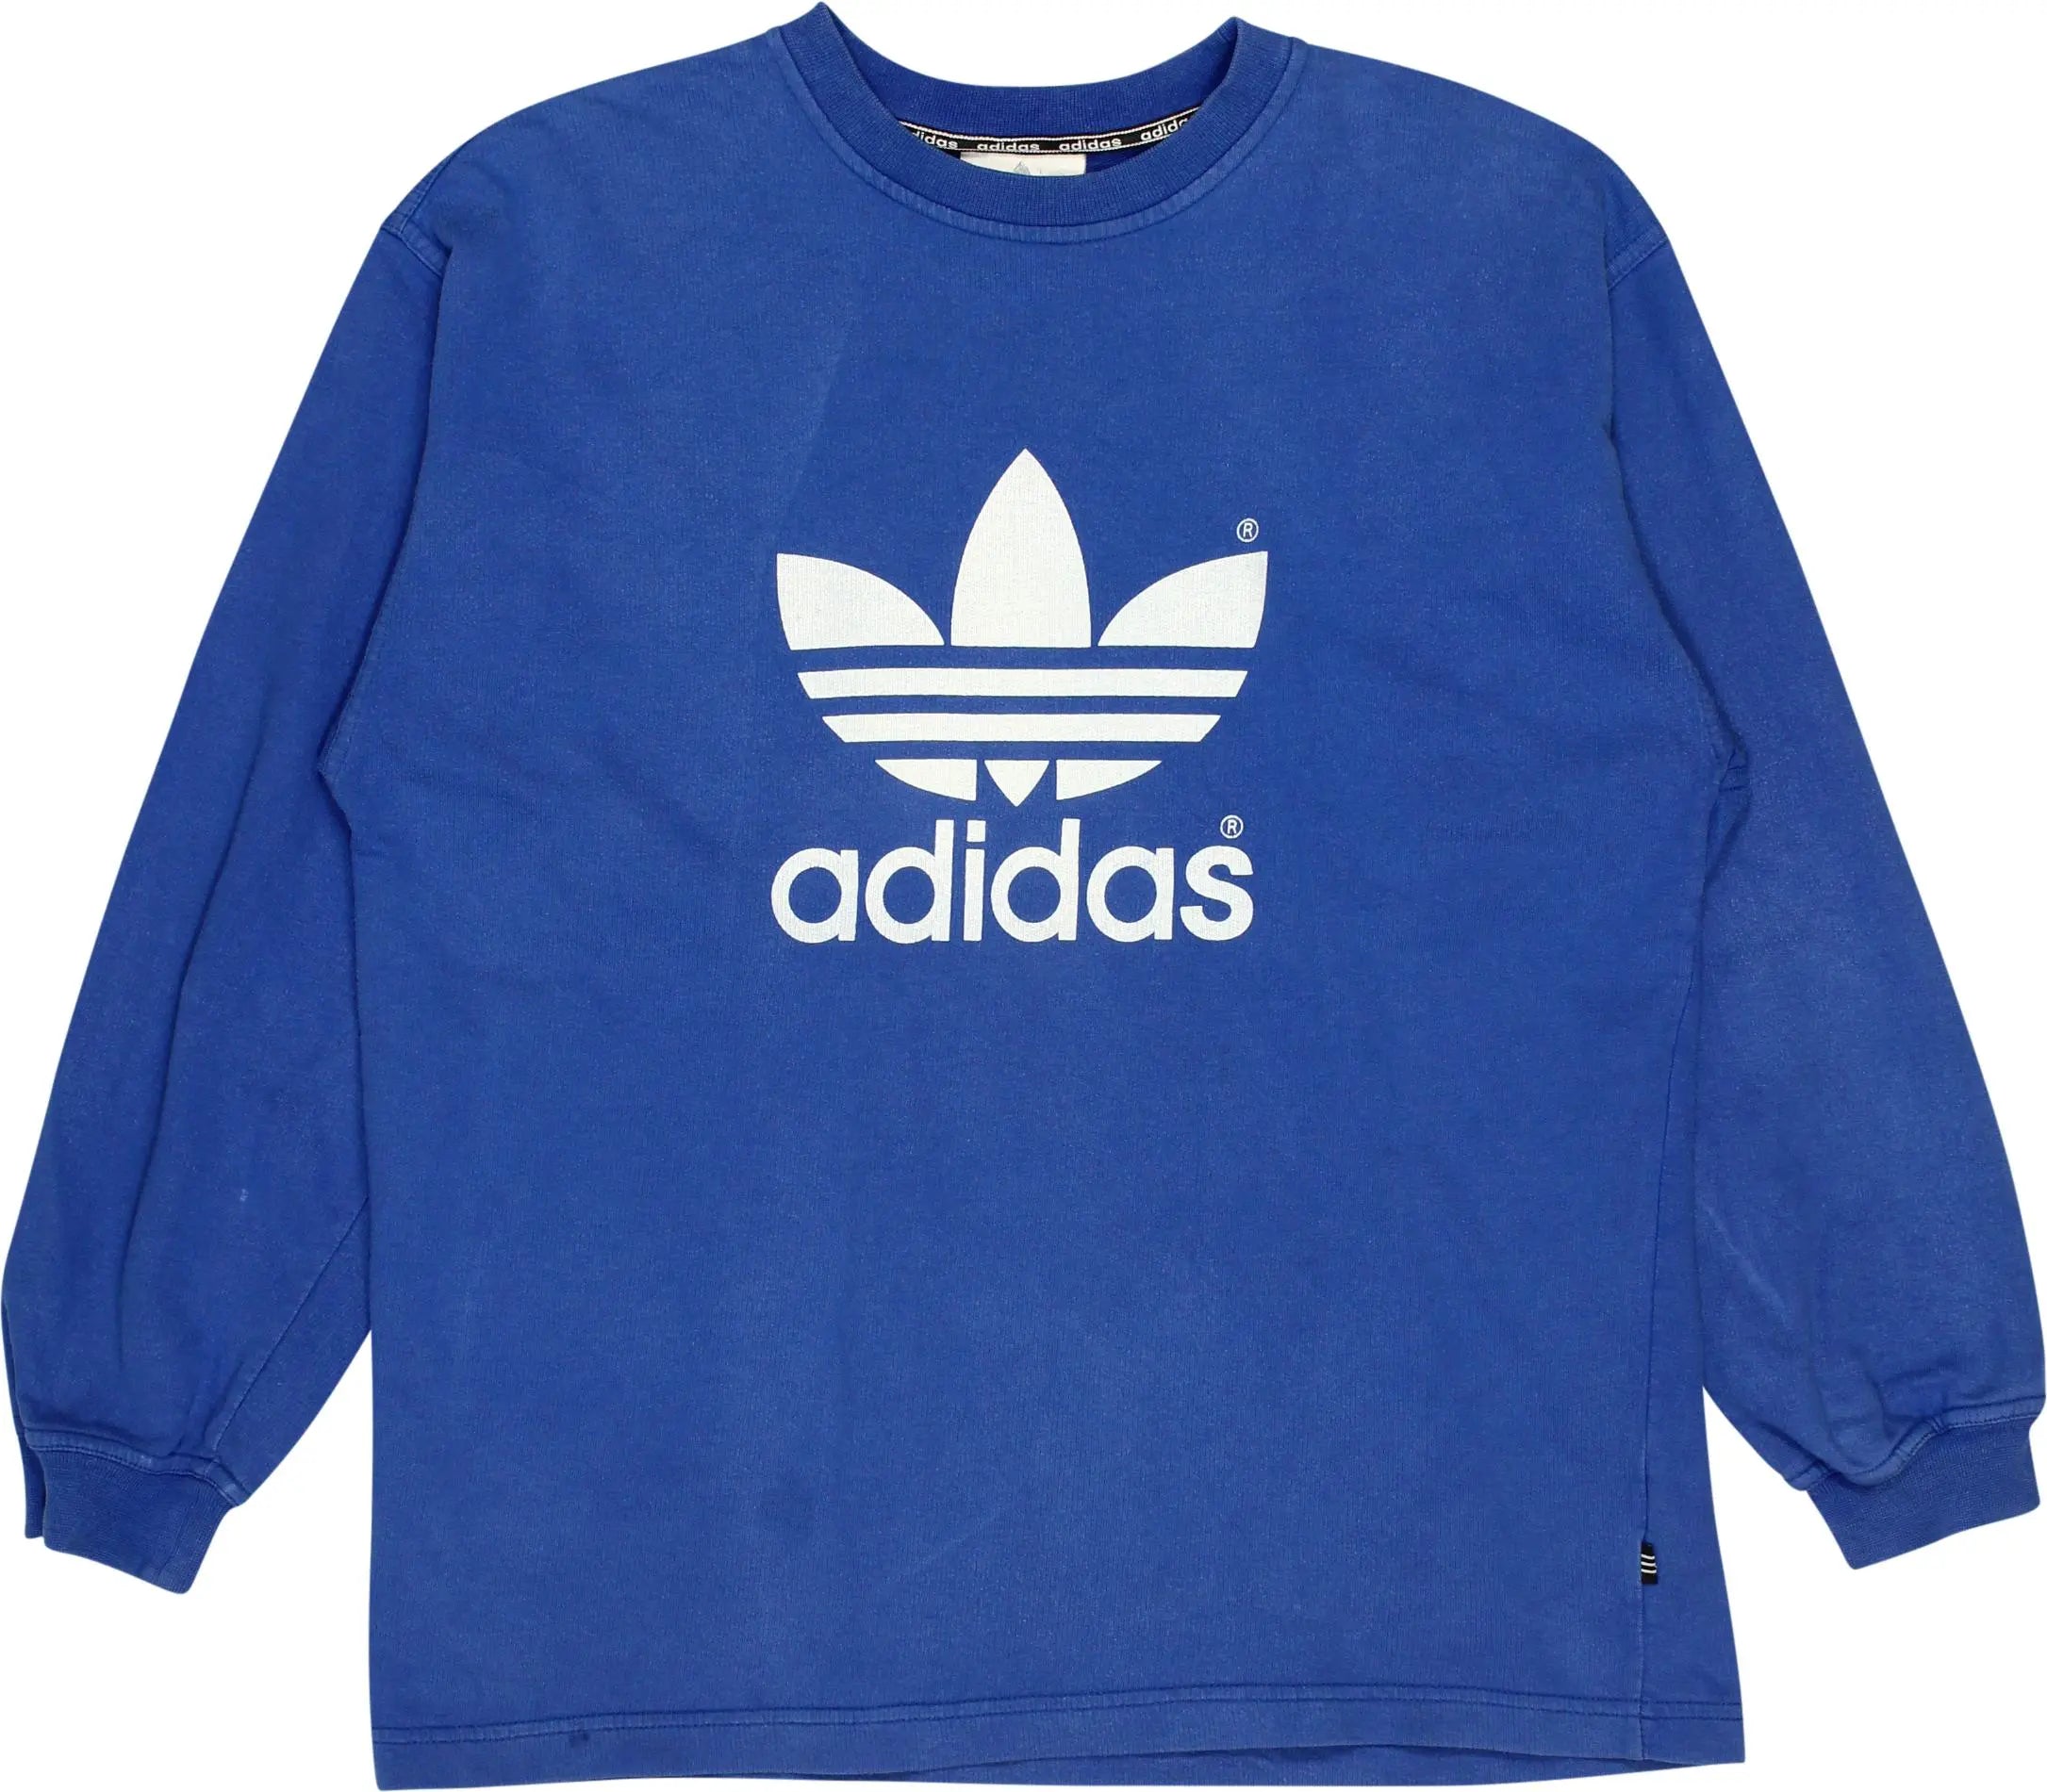 Adidas - 80s Blue Sweater by Adidas- ThriftTale.com - Vintage and second handclothing